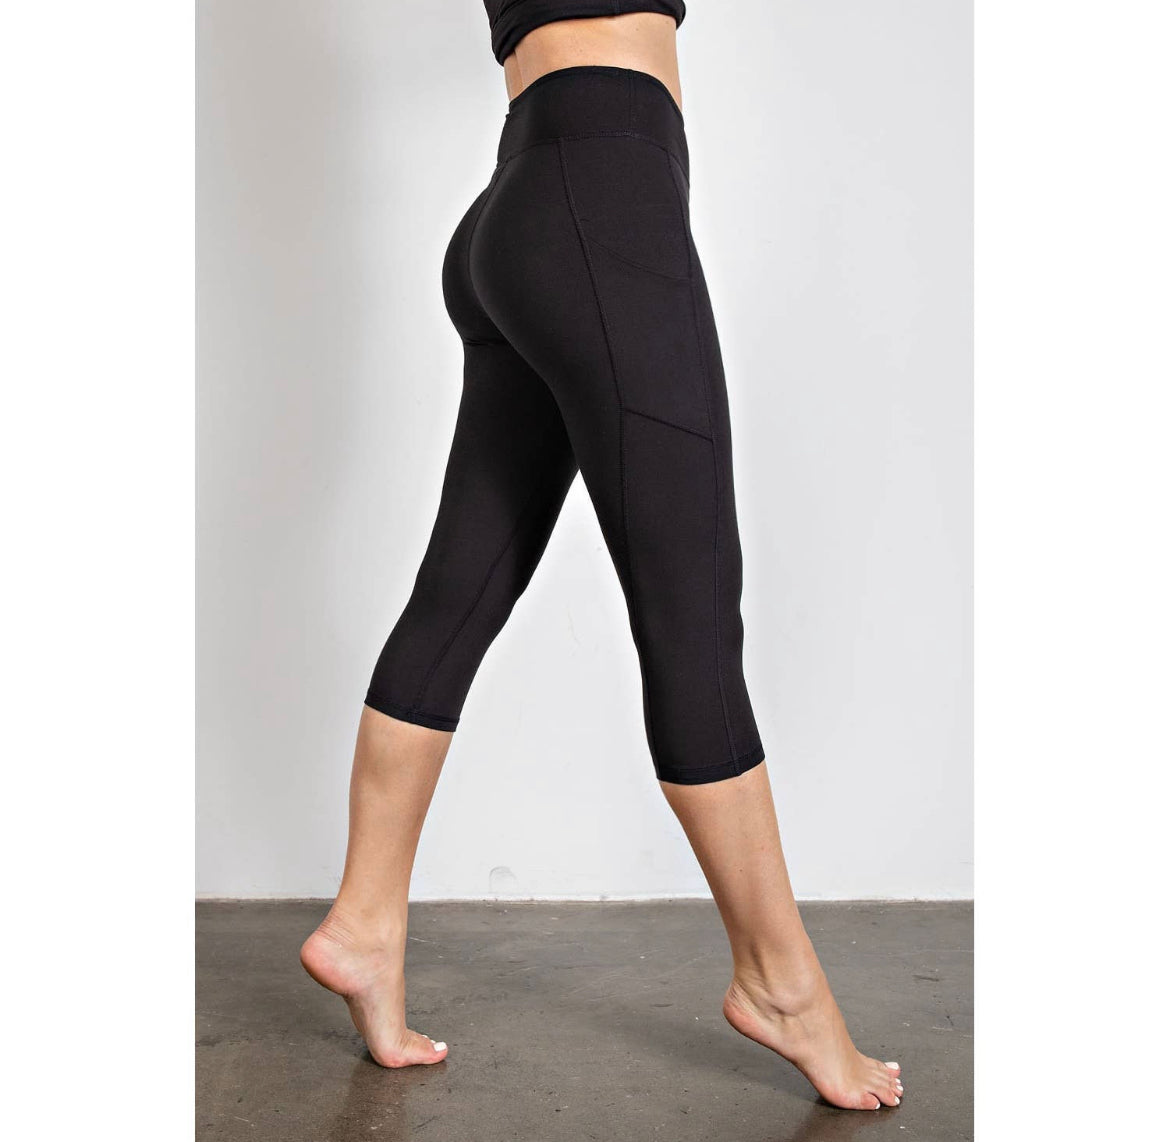 Butter Soft Capris with Pockets! 2 Colors!